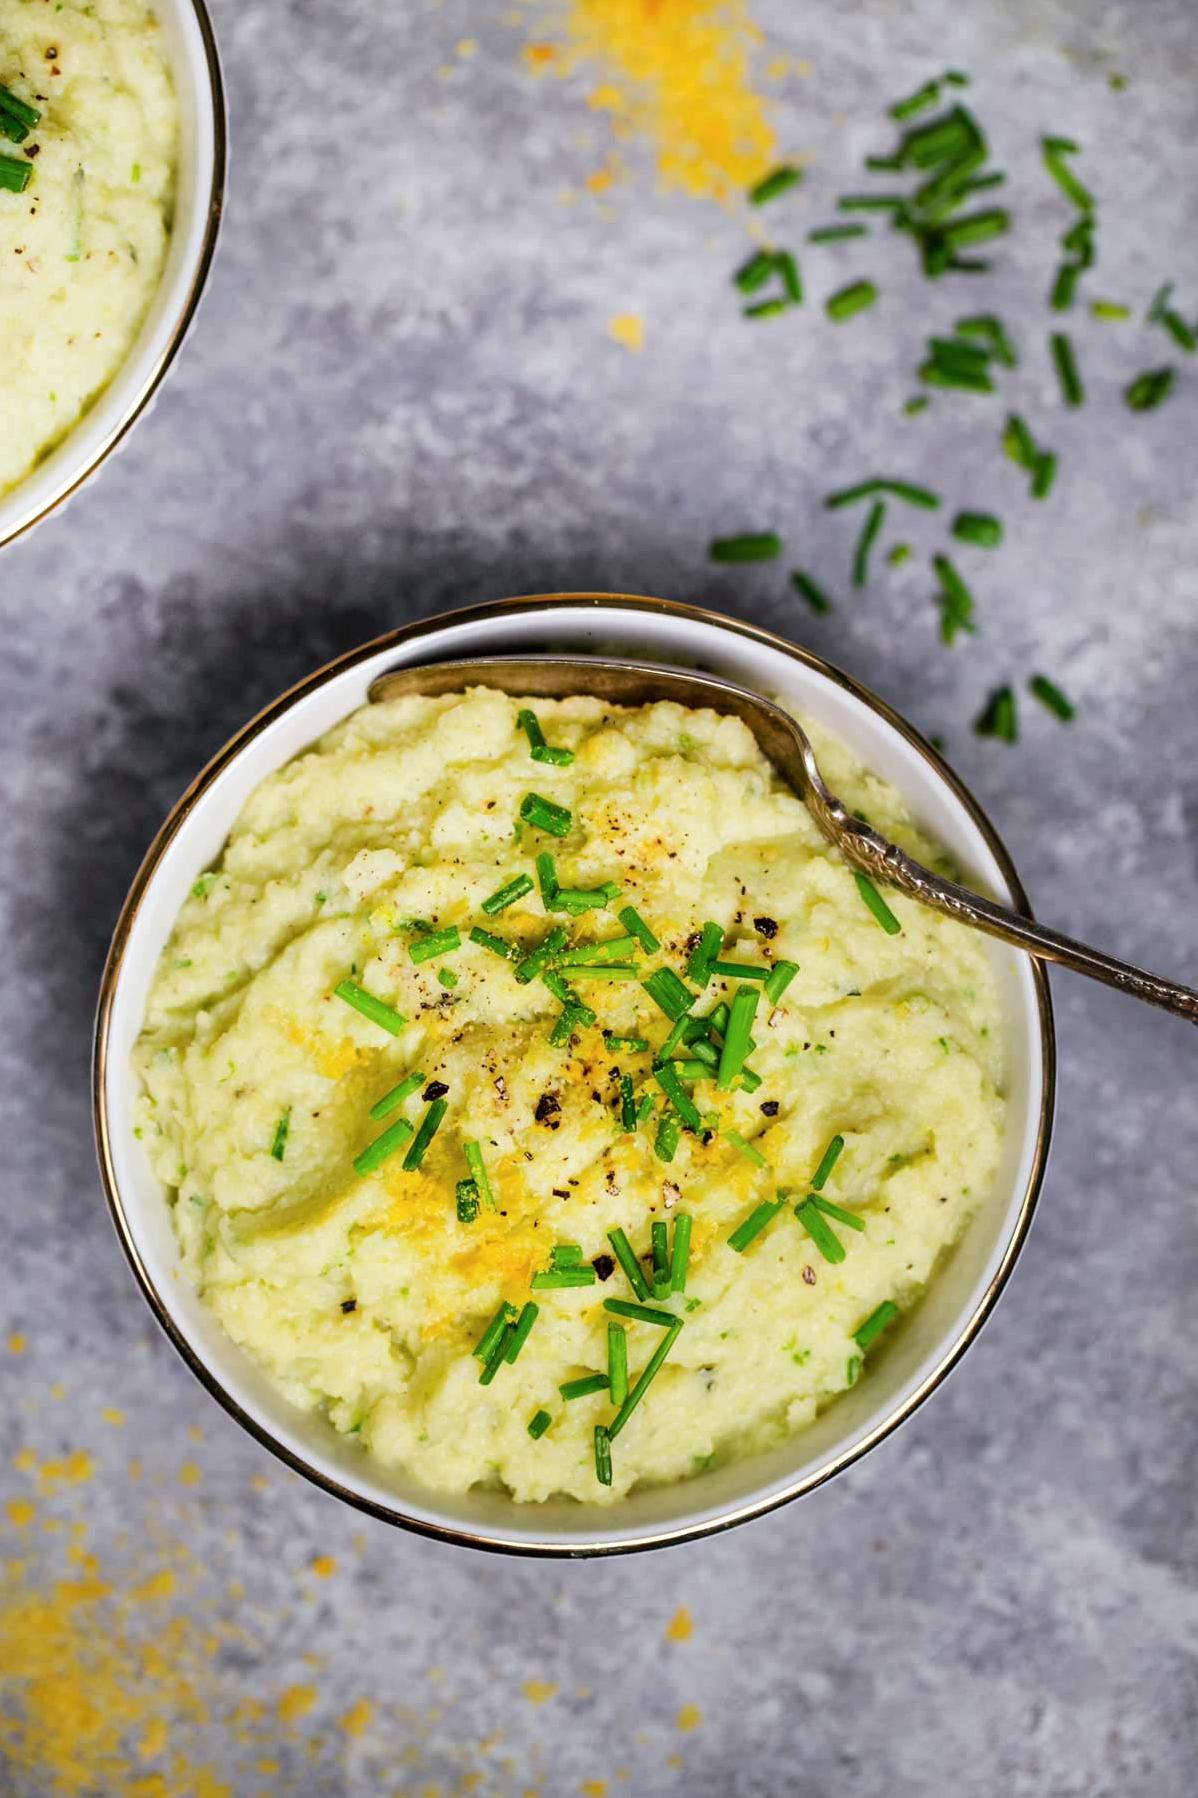  A healthy alternative to traditional mashed potatoes.